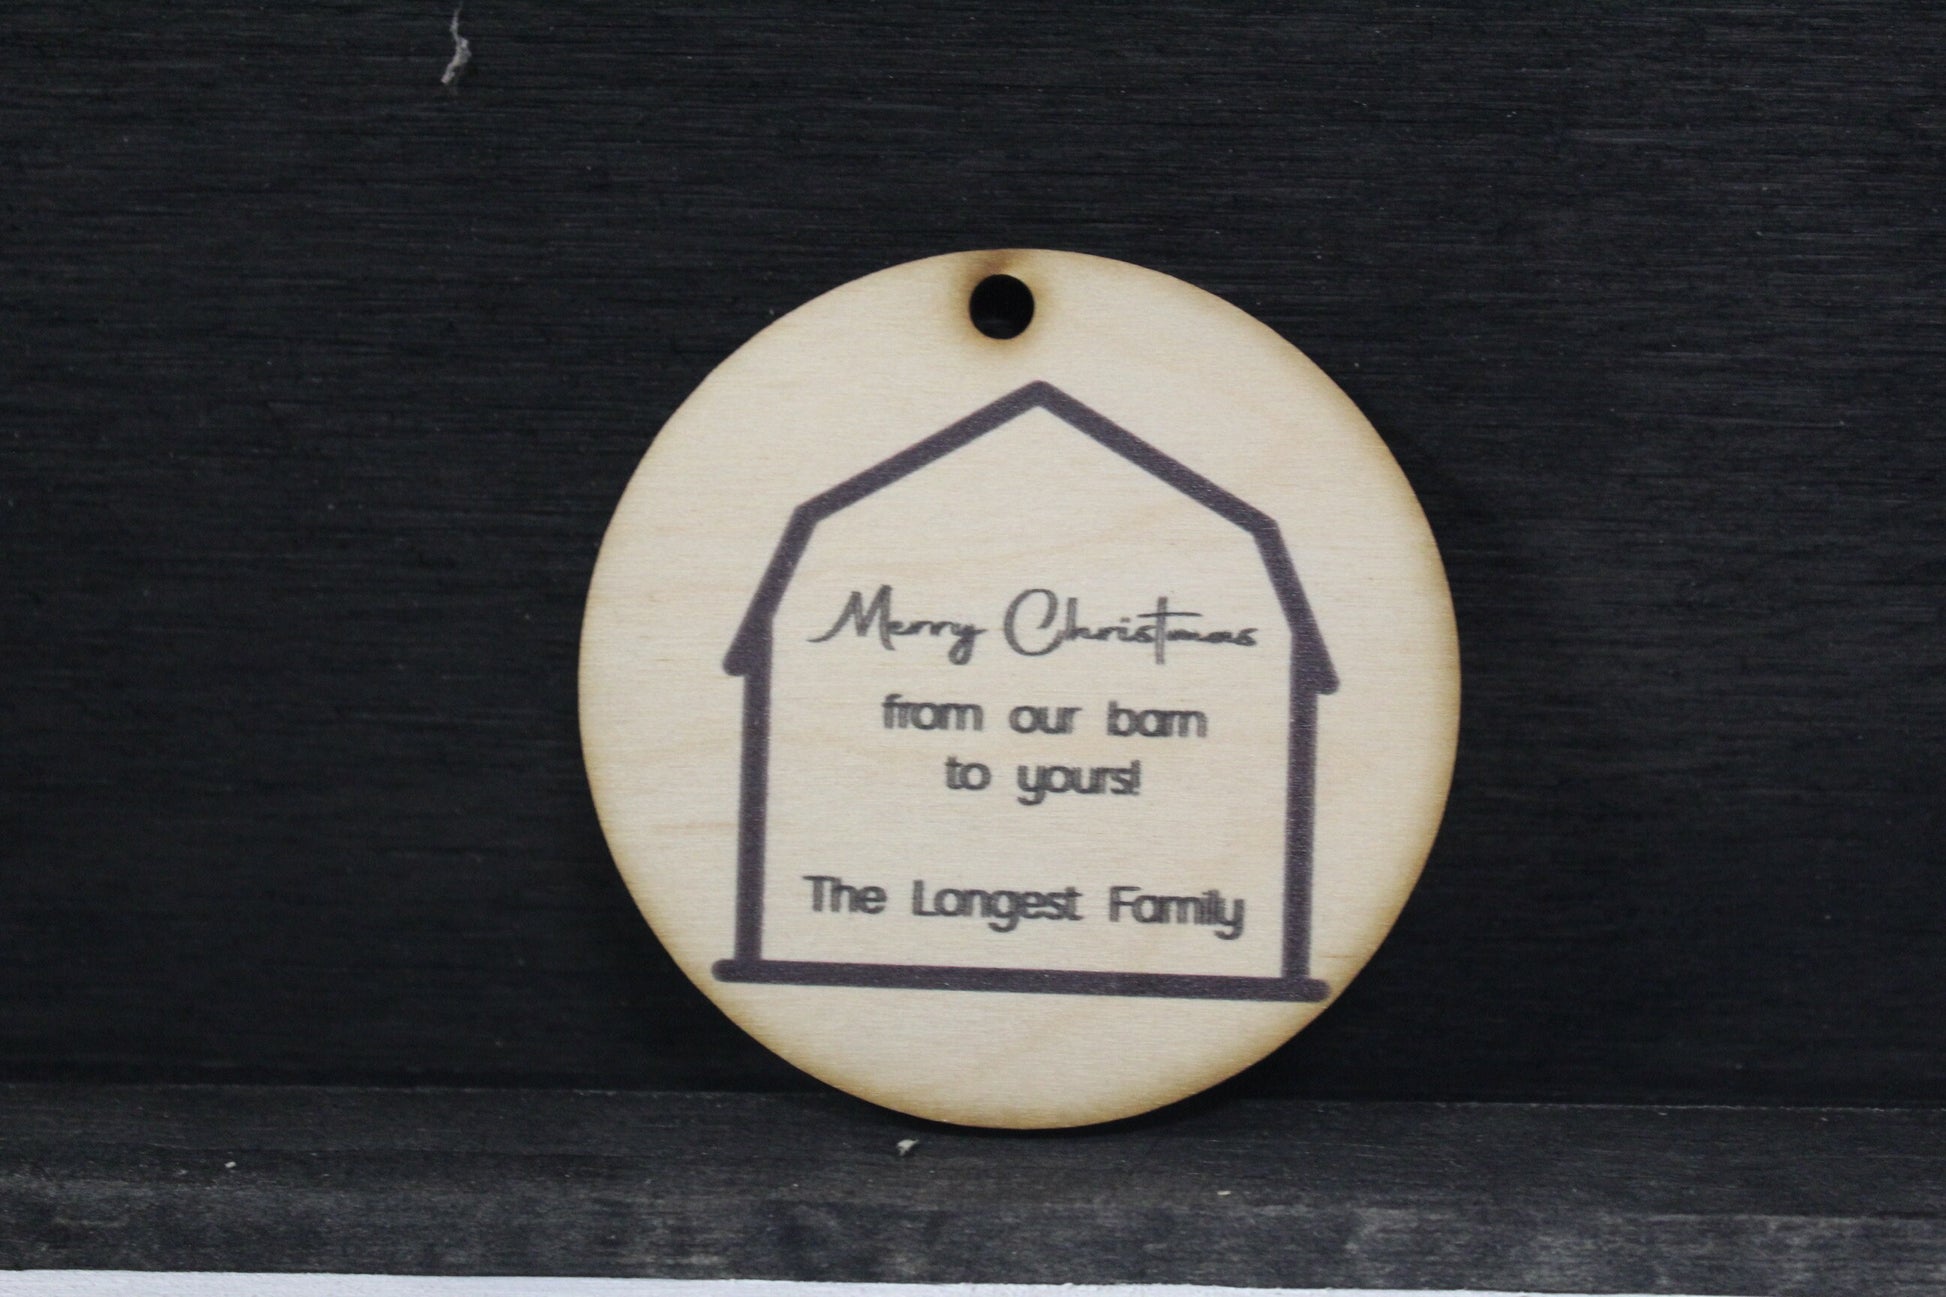 Merry Christmas From Our Barn To Yours Ornament Keepsake KeyChain Woodslice Family Farmhouse Gift